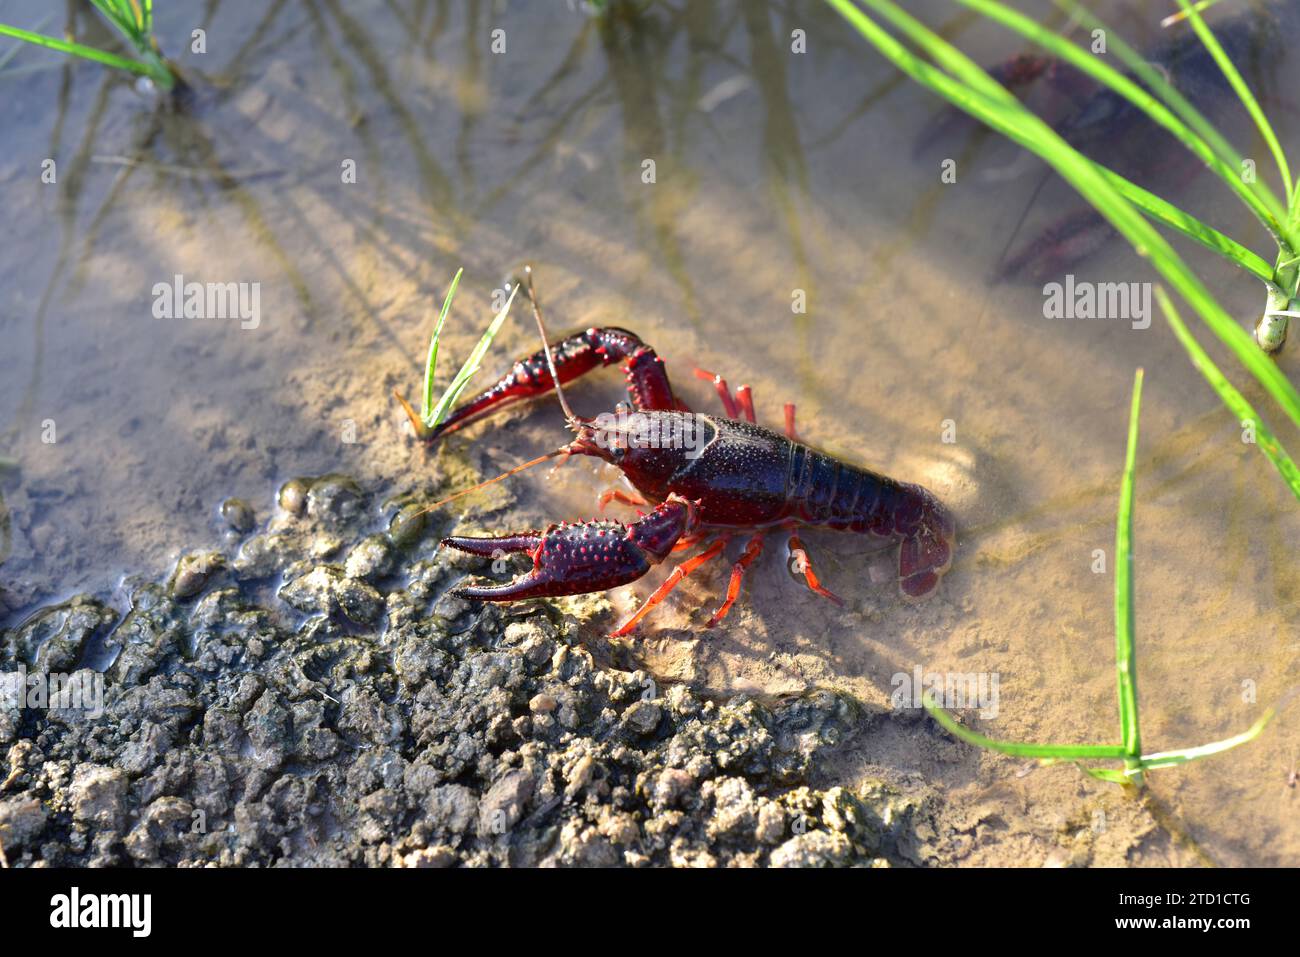 Red swamp crawfish or red swamp crayfish (Procambarus clarkii) is a freshwater crayfish native to northern Mexico and southern USA but introduced in o Stock Photo